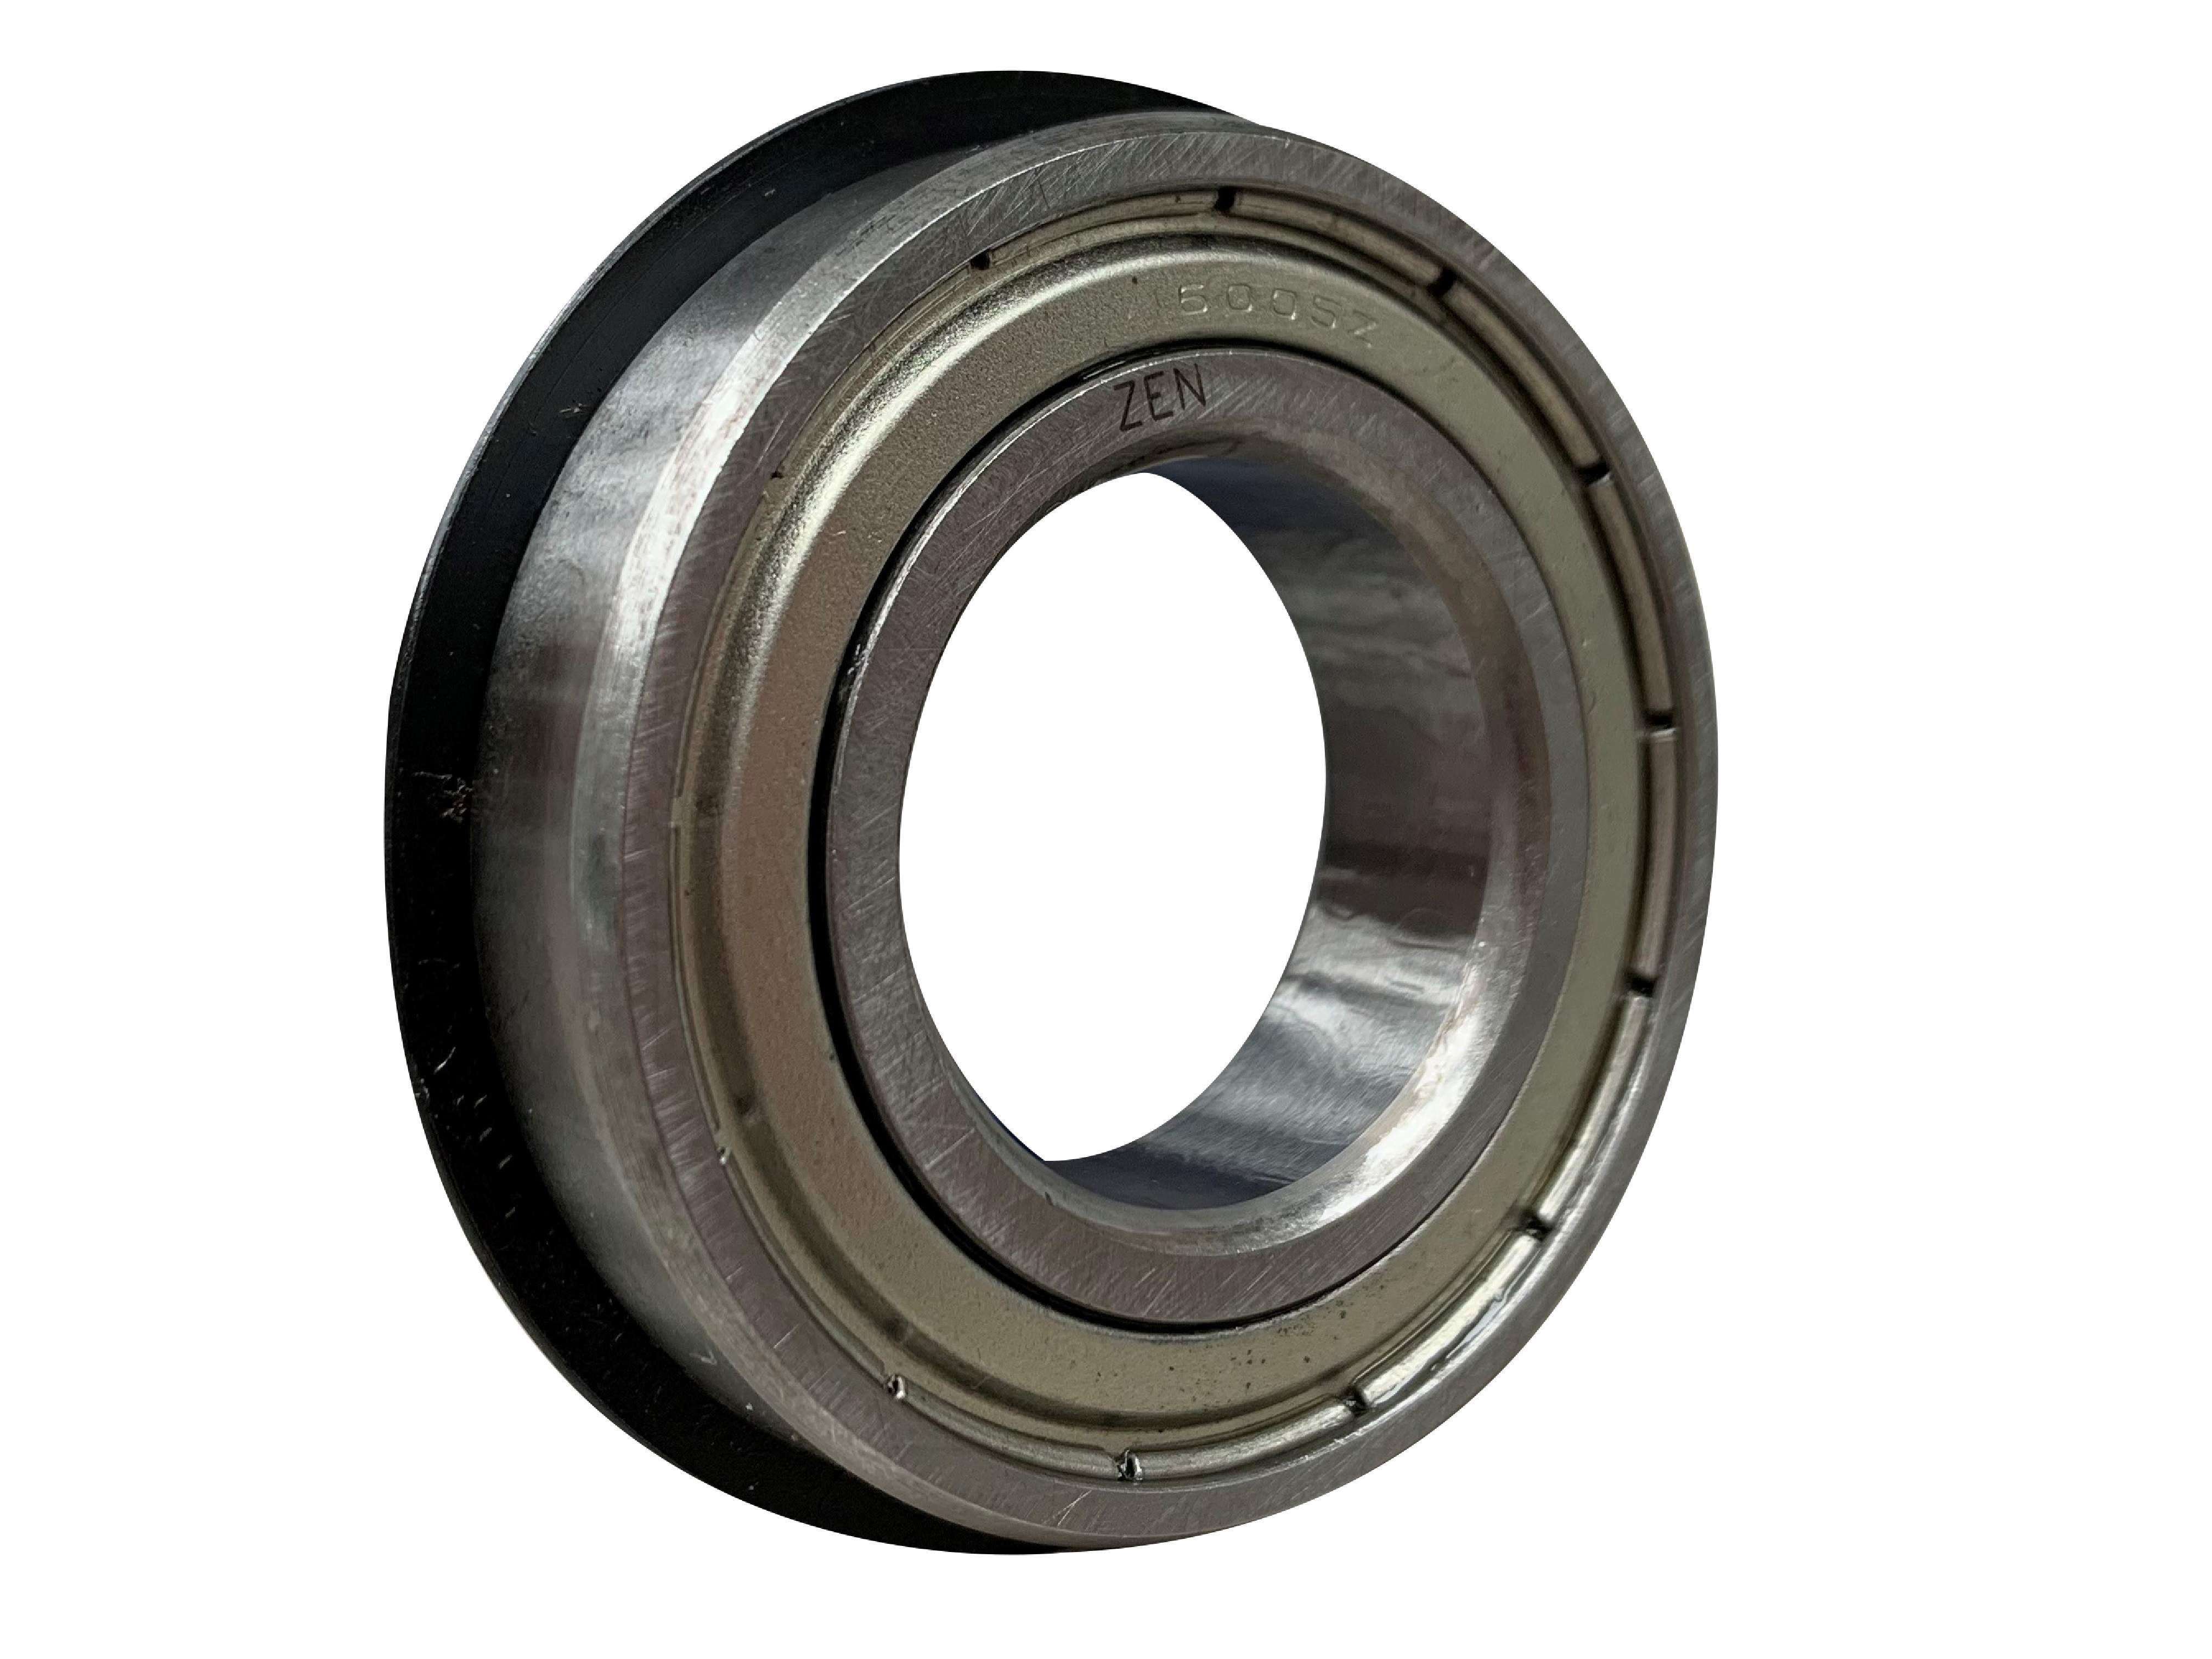 ZEN 6206-2Z-NR Shielded Ball Bearing With Snap Ring 30mm x 62mm x 16mm